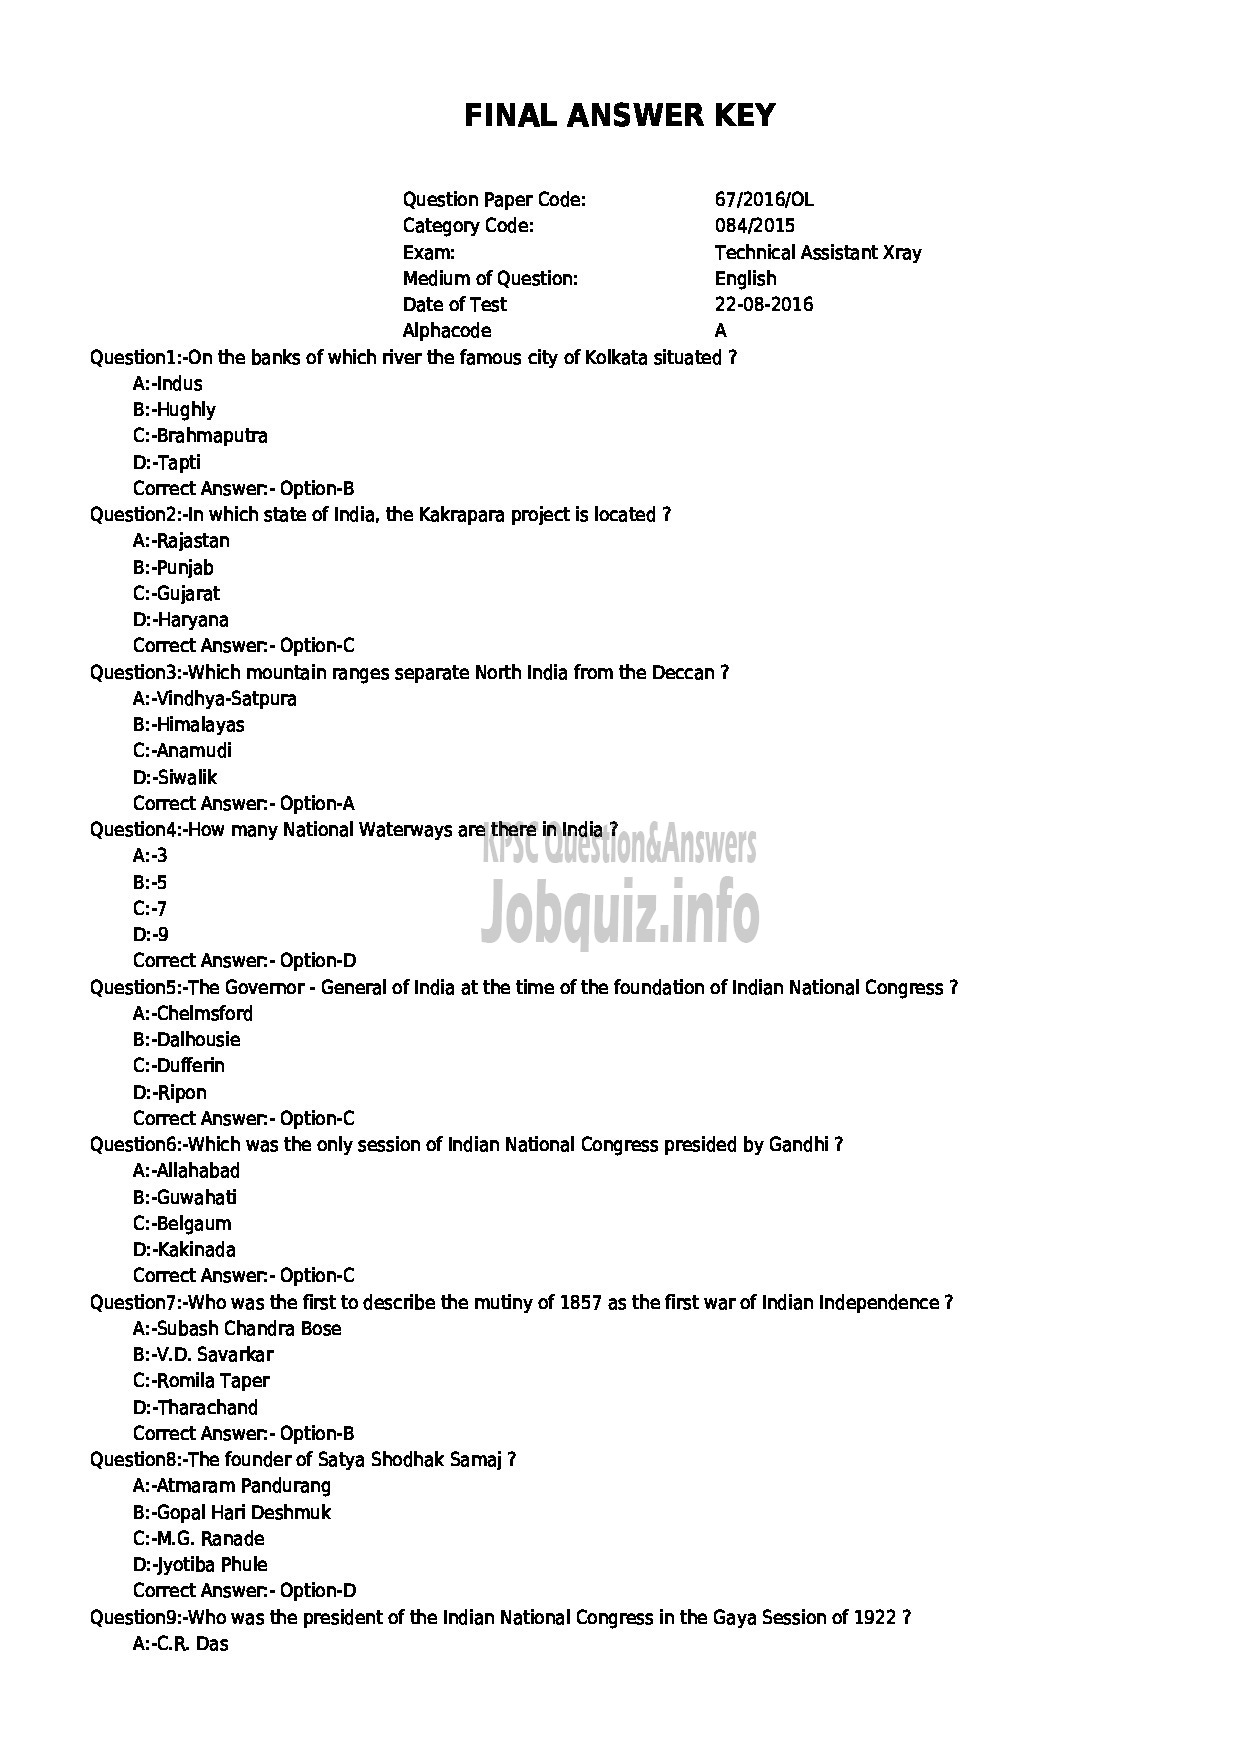 Kerala PSC Question Paper - TECHNICAL ASSISTANT X RAY GOVT AYURVEDA COLLEGE-1